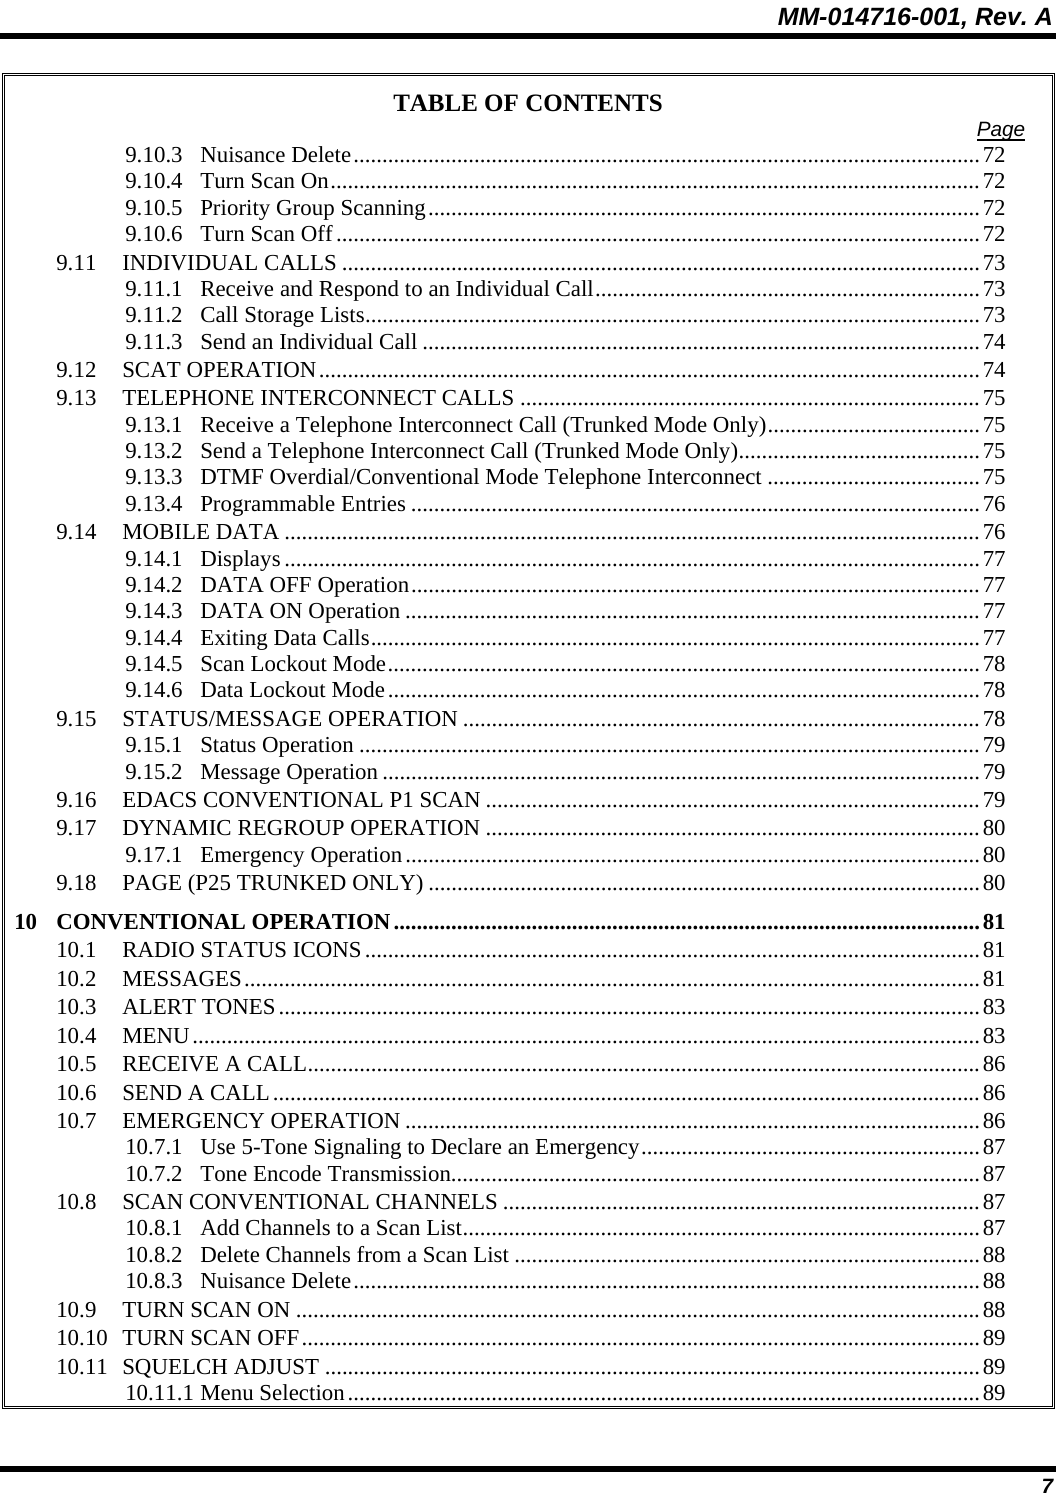 MM-014716-001, Rev. A 7 TABLE OF CONTENTS  Page 9.10.3 Nuisance Delete.............................................................................................................72 9.10.4 Turn Scan On.................................................................................................................72 9.10.5 Priority Group Scanning................................................................................................72 9.10.6 Turn Scan Off................................................................................................................72 9.11 INDIVIDUAL CALLS ...............................................................................................................73 9.11.1 Receive and Respond to an Individual Call...................................................................73 9.11.2 Call Storage Lists...........................................................................................................73 9.11.3 Send an Individual Call .................................................................................................74 9.12 SCAT OPERATION...................................................................................................................74 9.13 TELEPHONE INTERCONNECT CALLS ................................................................................75 9.13.1 Receive a Telephone Interconnect Call (Trunked Mode Only).....................................75 9.13.2 Send a Telephone Interconnect Call (Trunked Mode Only)..........................................75 9.13.3 DTMF Overdial/Conventional Mode Telephone Interconnect .....................................75 9.13.4 Programmable Entries ...................................................................................................76 9.14 MOBILE DATA .........................................................................................................................76 9.14.1 Displays .........................................................................................................................77 9.14.2 DATA OFF Operation...................................................................................................77 9.14.3 DATA ON Operation ....................................................................................................77 9.14.4 Exiting Data Calls..........................................................................................................77 9.14.5 Scan Lockout Mode.......................................................................................................78 9.14.6 Data Lockout Mode.......................................................................................................78 9.15 STATUS/MESSAGE OPERATION ..........................................................................................78 9.15.1 Status Operation ............................................................................................................79 9.15.2 Message Operation ........................................................................................................79 9.16 EDACS CONVENTIONAL P1 SCAN ......................................................................................79 9.17 DYNAMIC REGROUP OPERATION ......................................................................................80 9.17.1 Emergency Operation....................................................................................................80 9.18 PAGE (P25 TRUNKED ONLY) ................................................................................................80 10 CONVENTIONAL OPERATION......................................................................................................81 10.1 RADIO STATUS ICONS...........................................................................................................81 10.2 MESSAGES................................................................................................................................81 10.3 ALERT TONES..........................................................................................................................83 10.4 MENU.........................................................................................................................................83 10.5 RECEIVE A CALL.....................................................................................................................86 10.6 SEND A CALL...........................................................................................................................86 10.7 EMERGENCY OPERATION ....................................................................................................86 10.7.1 Use 5-Tone Signaling to Declare an Emergency...........................................................87 10.7.2 Tone Encode Transmission............................................................................................87 10.8 SCAN CONVENTIONAL CHANNELS ...................................................................................87 10.8.1 Add Channels to a Scan List..........................................................................................87 10.8.2 Delete Channels from a Scan List .................................................................................88 10.8.3 Nuisance Delete.............................................................................................................88 10.9 TURN SCAN ON .......................................................................................................................88 10.10 TURN SCAN OFF......................................................................................................................89 10.11 SQUELCH ADJUST ..................................................................................................................89 10.11.1 Menu Selection..............................................................................................................89 